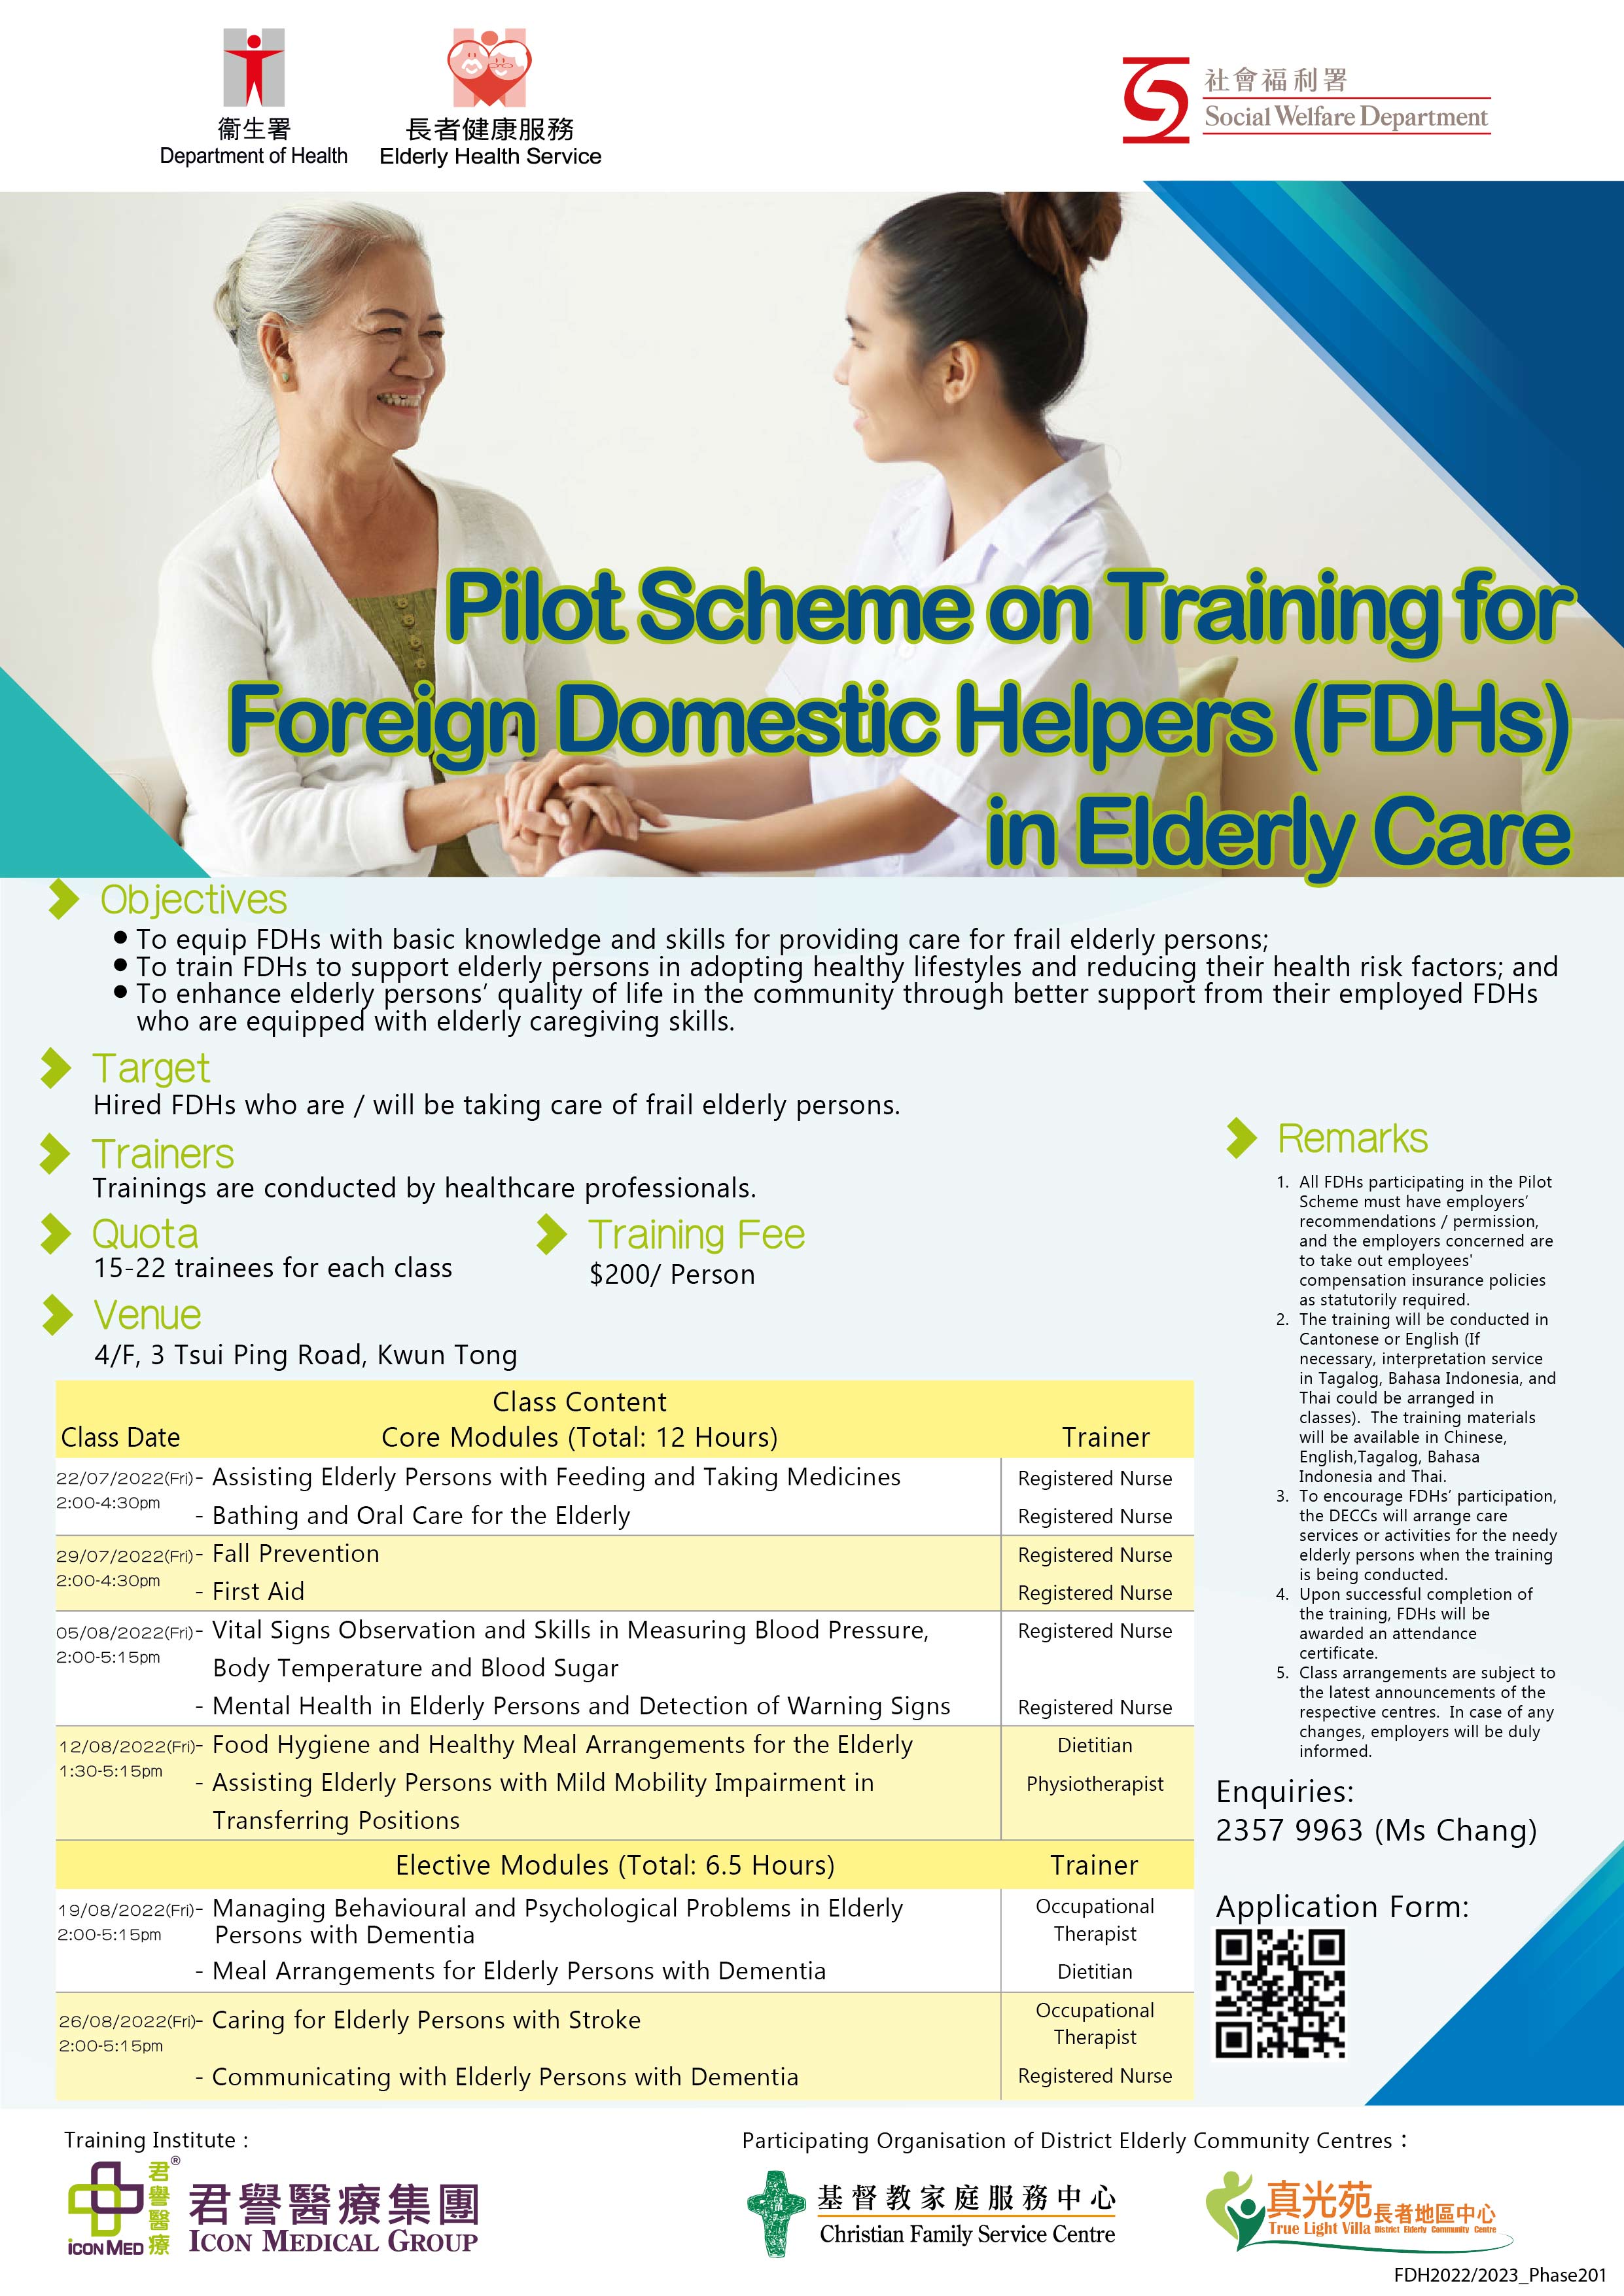 Pilot Scheme on Training for Foreign Domestic Helpers in Elderly Care